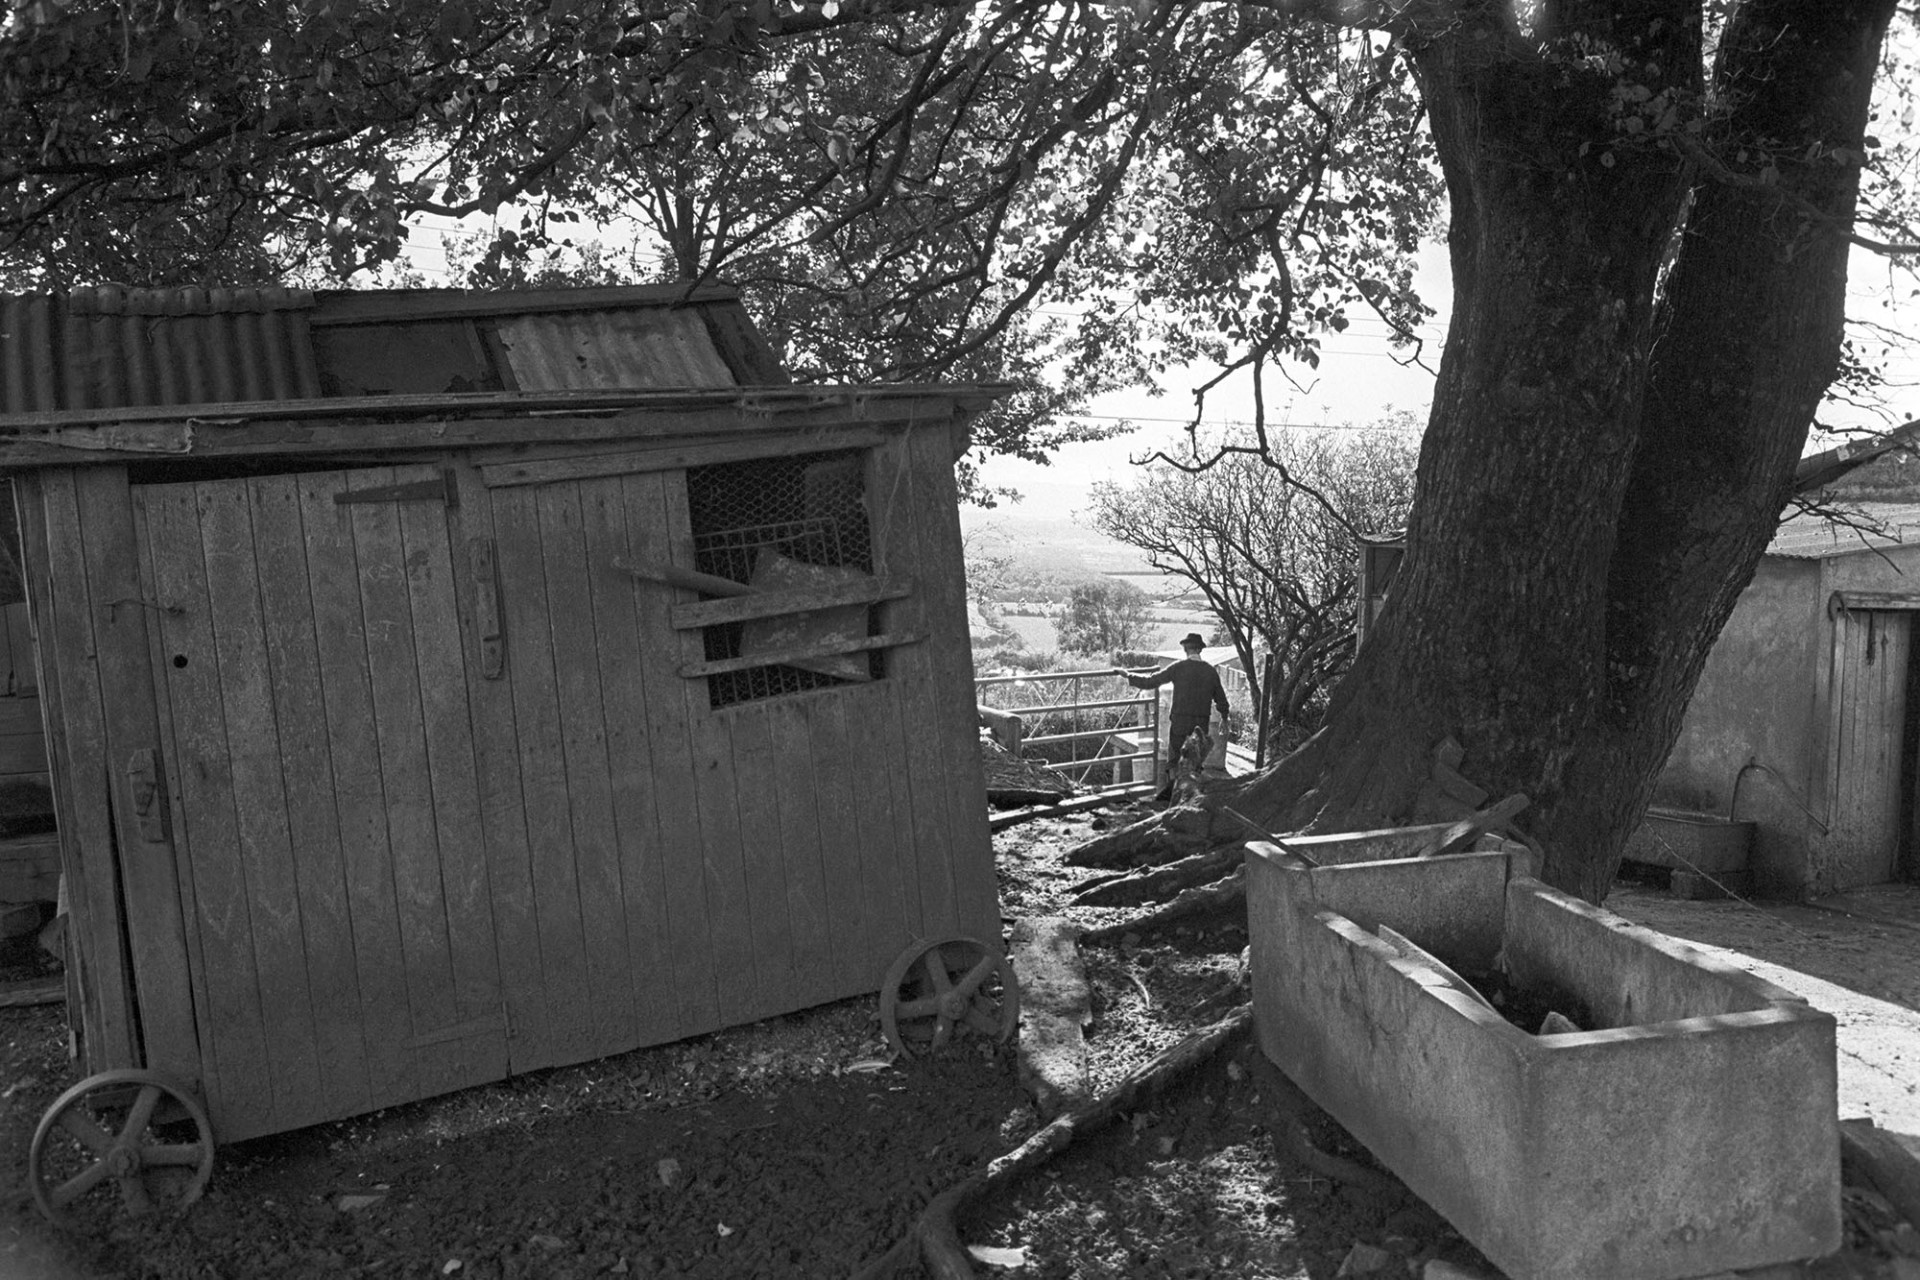 Farmyard chicken house and trough.
[A farmyard with a trough and wooden hen house at Upcott, near Dolton. Fred Folland is resting on a gate to the farmyard.
See the 'Additional Notes by James Ravilious' field for more information.]